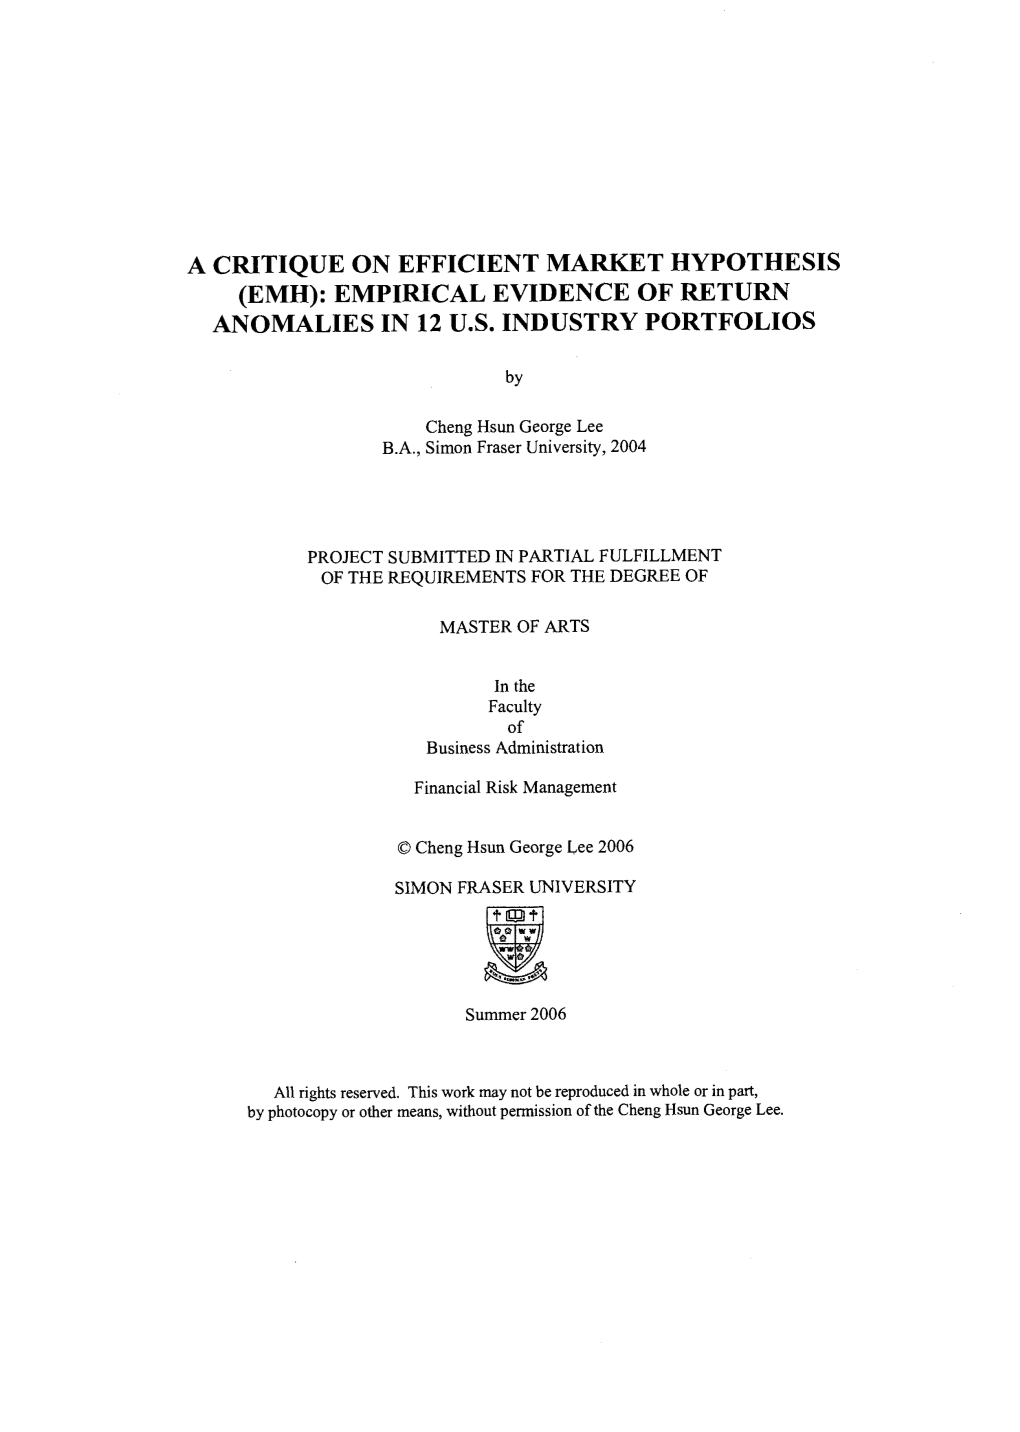 A Critique on Efficient Market Hypothesis (Emh): Empirical Evidence of Return Anomalies in 12 U.S